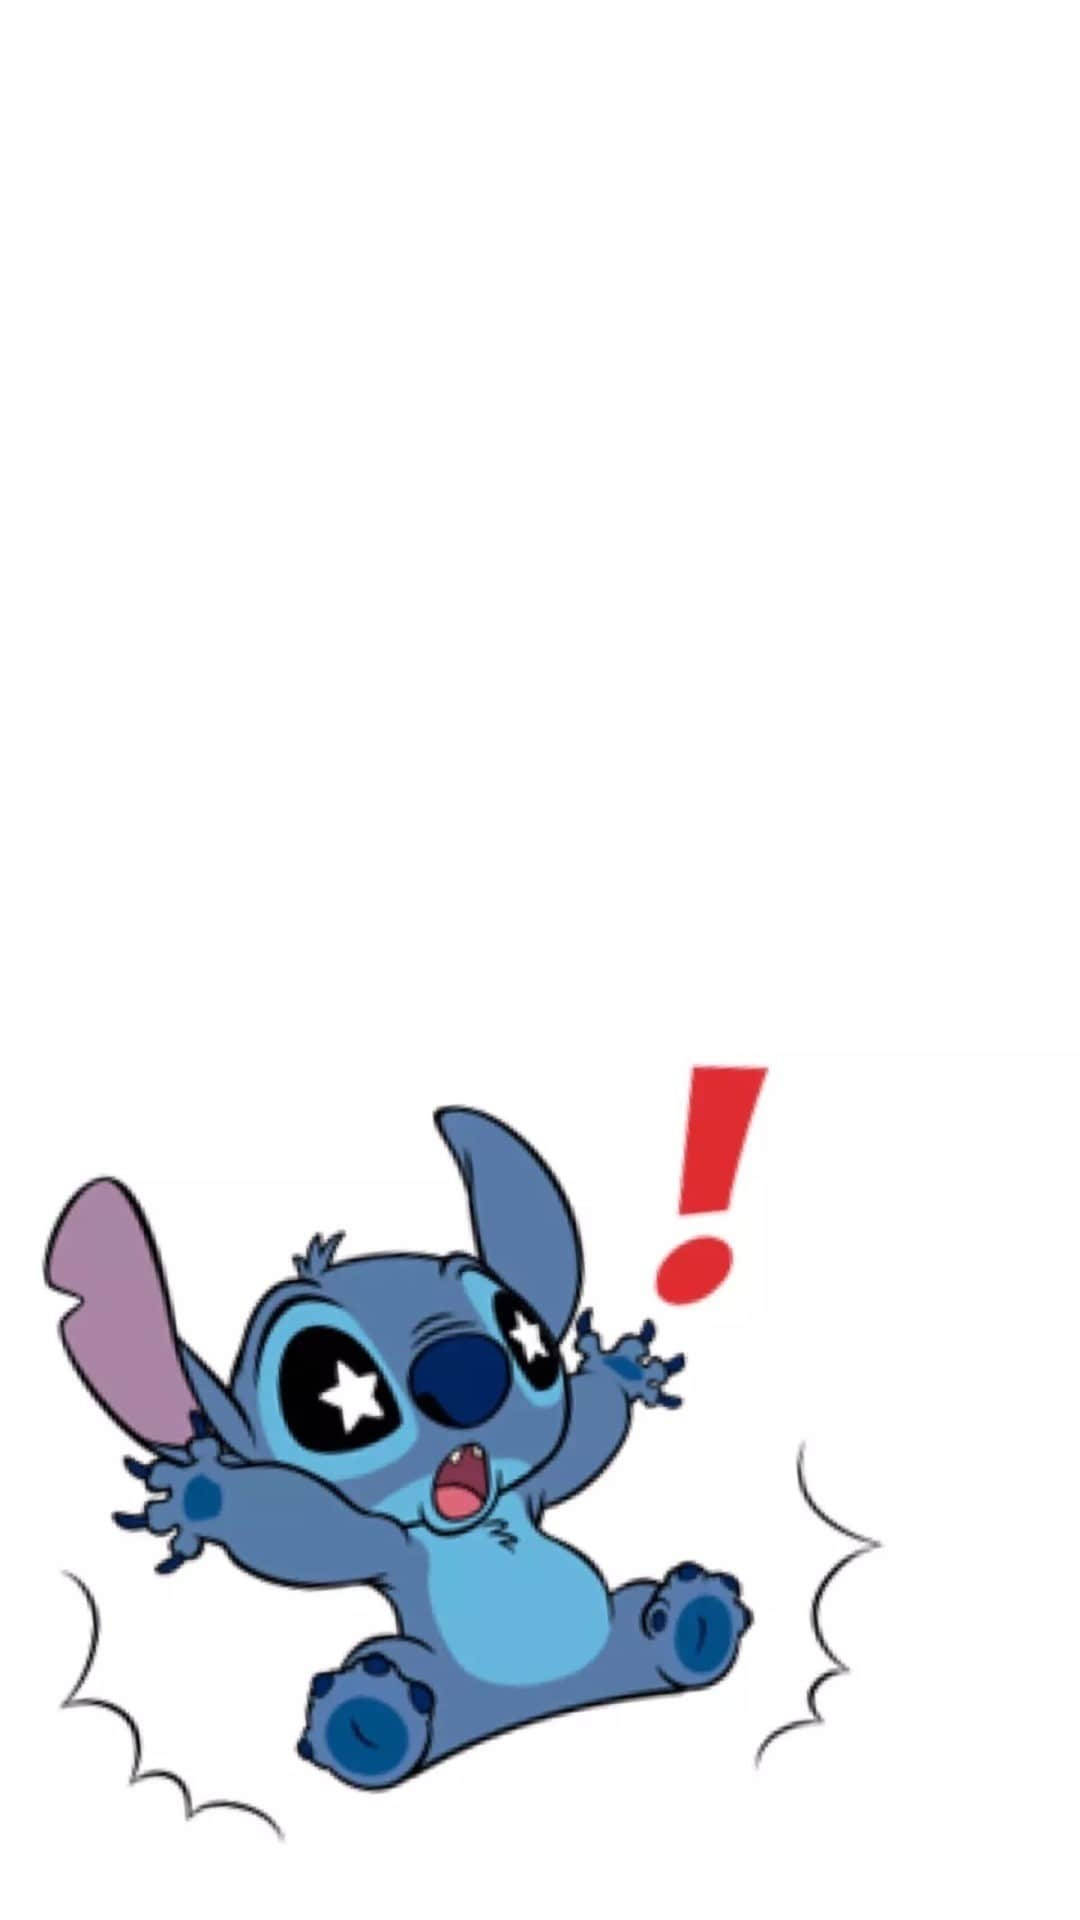 Cute Aesthetic Stitch Spooked Blue Alien Background